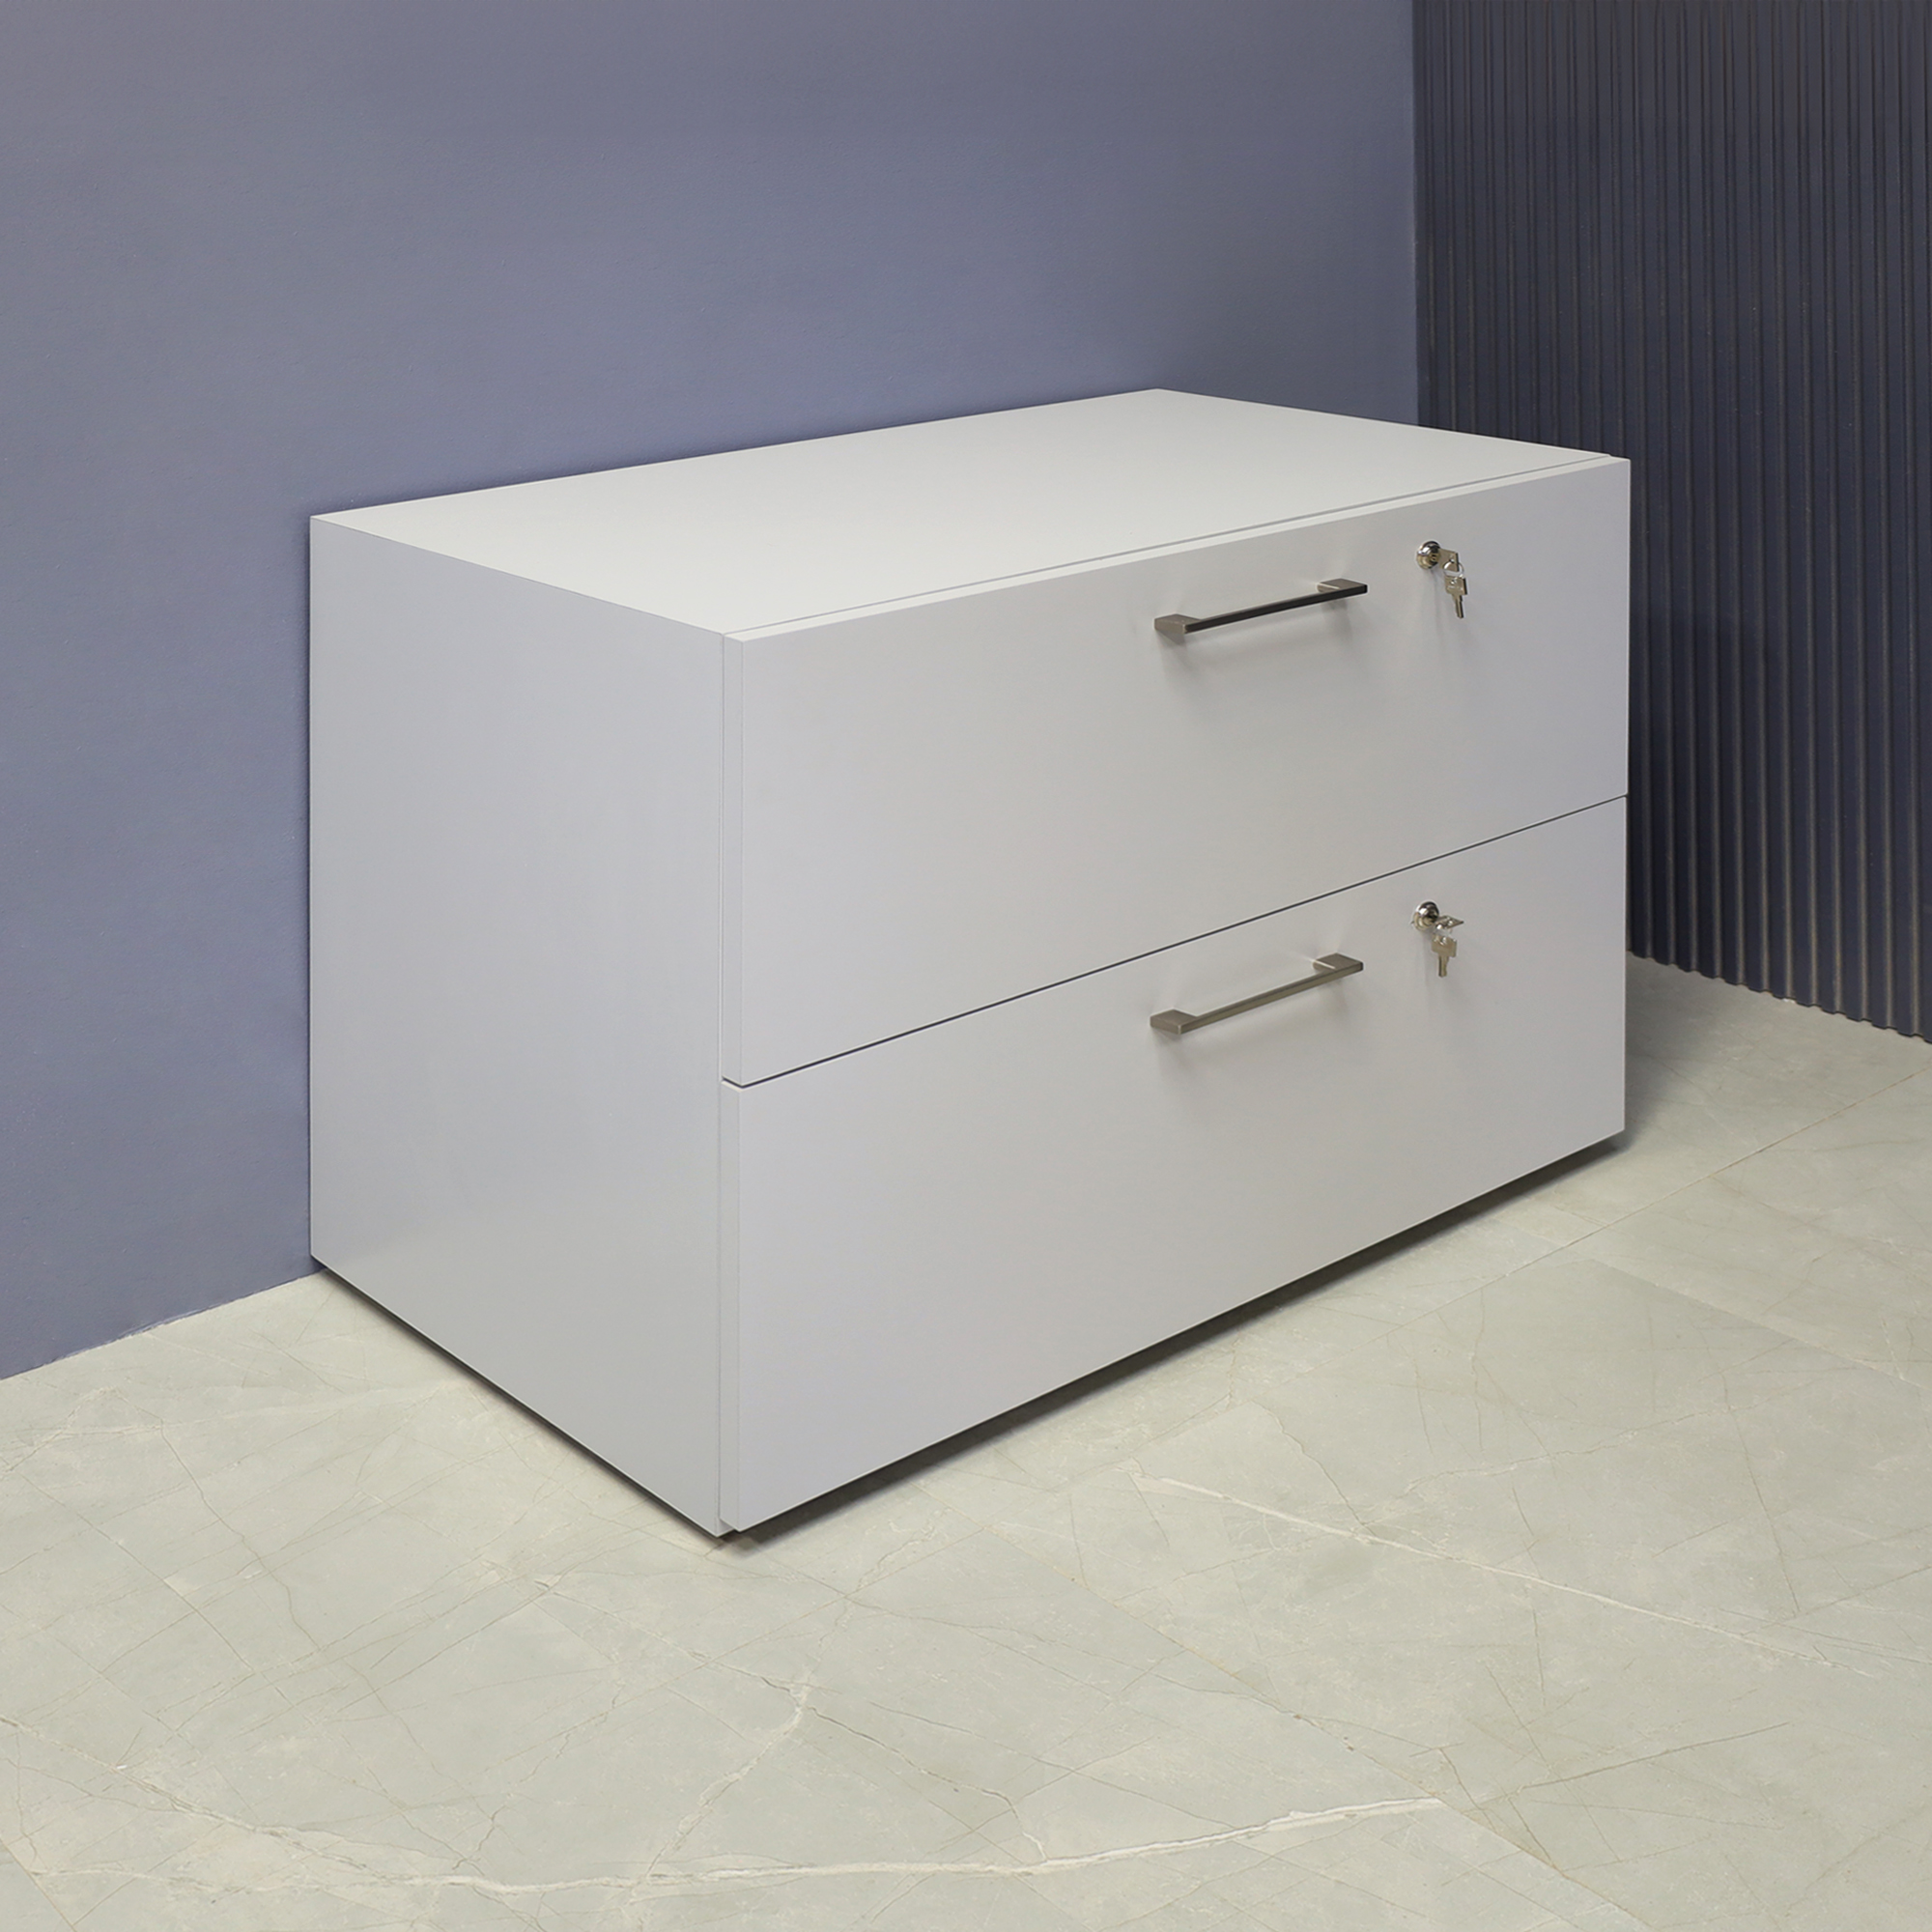 Naples Lateral File Cabinet in folkstone gray matte laminate, shown here.